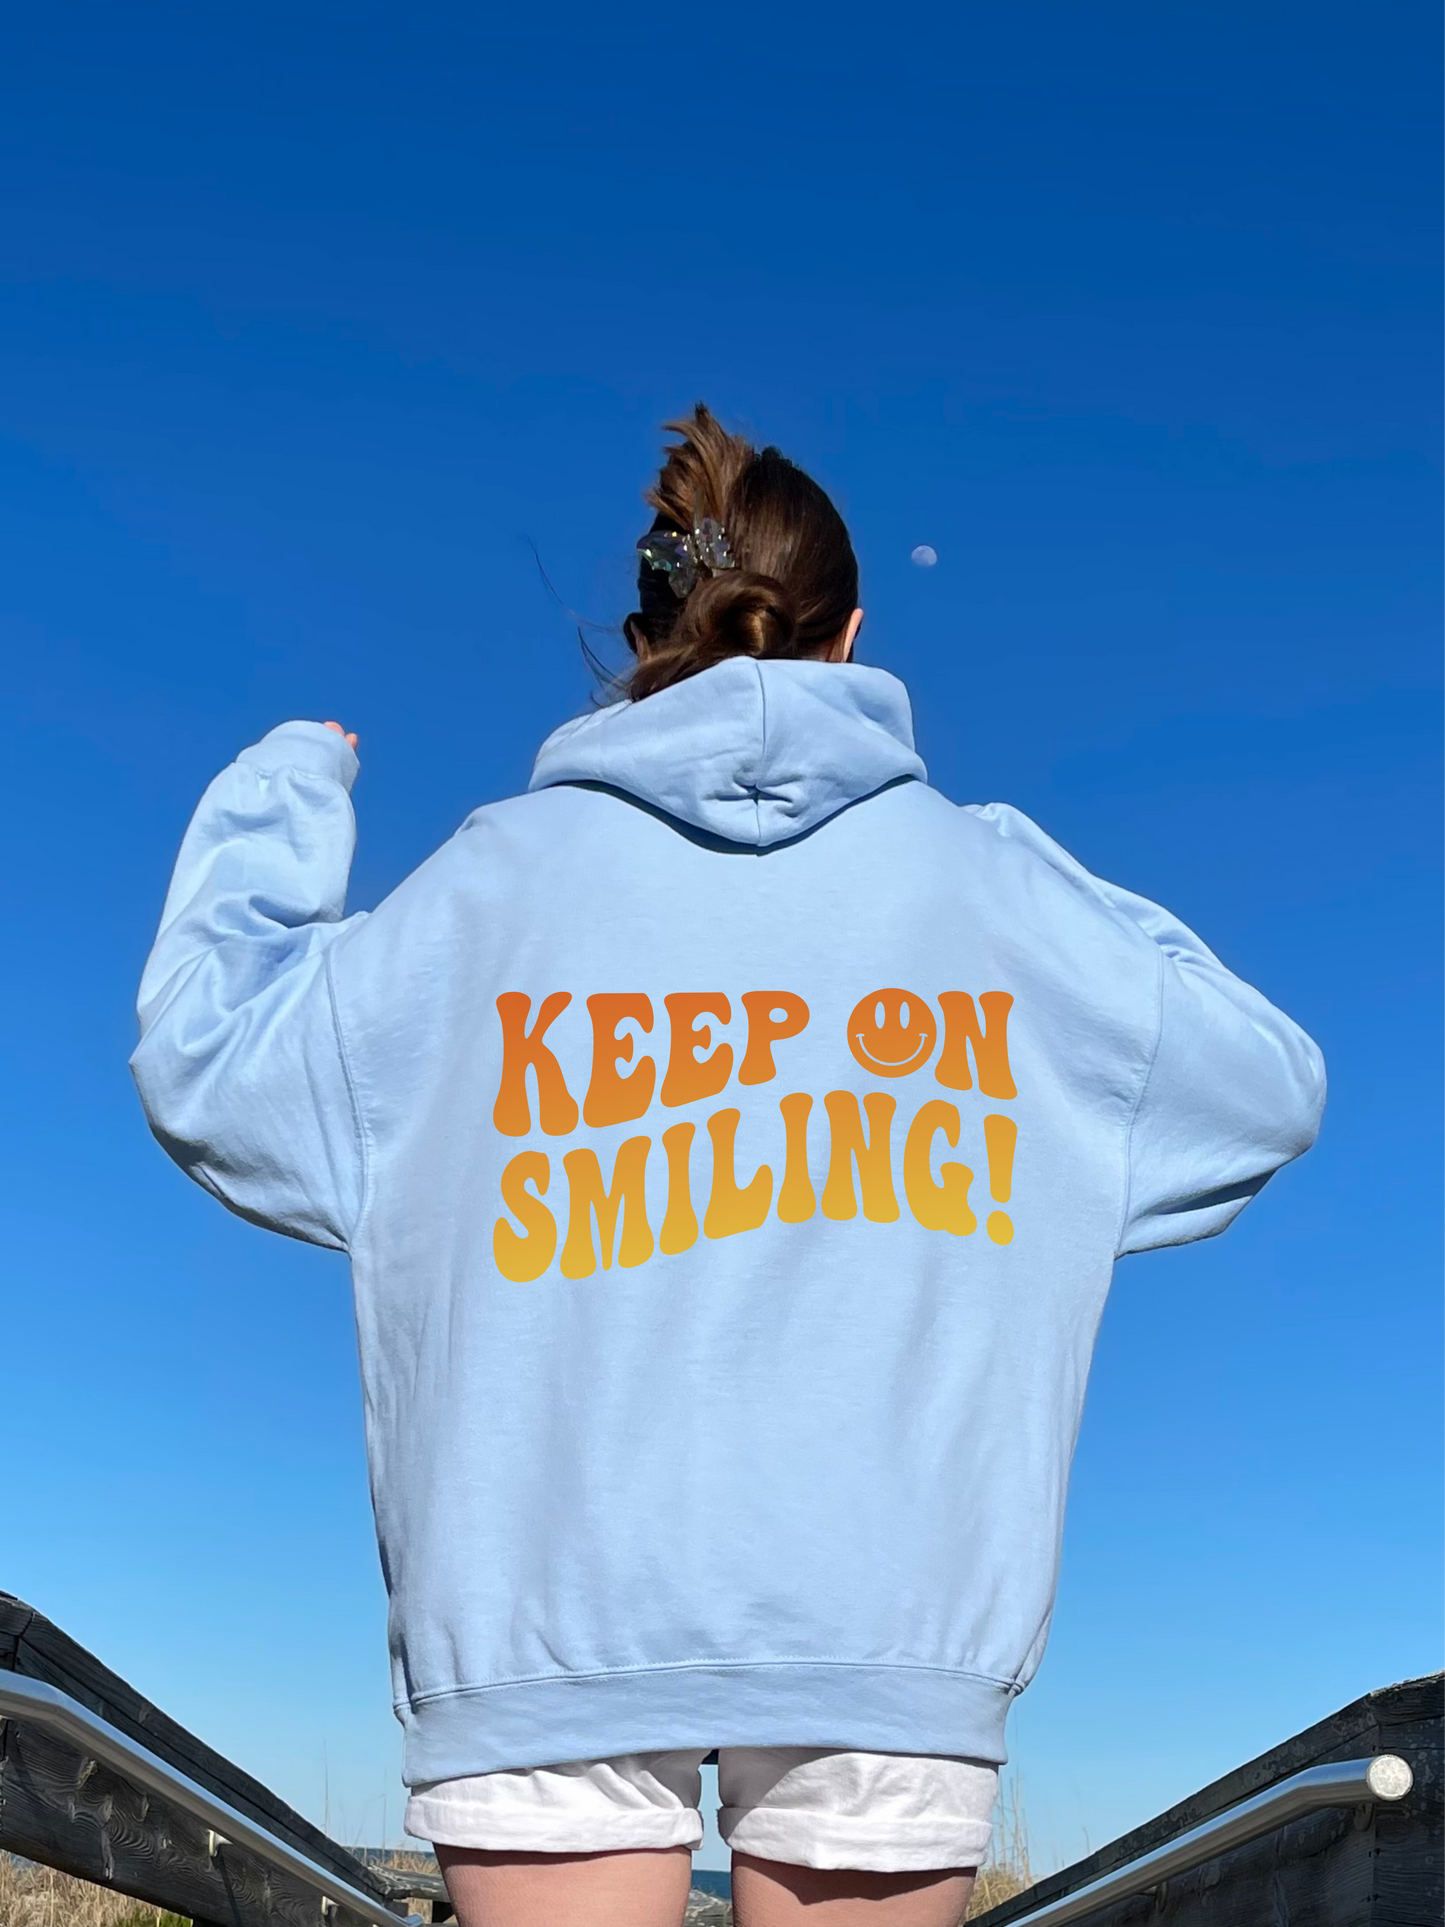 Keep on Smiling On Smiley Face Hoodie, Oversized hoodie, Retro y2k style hooded sweatshirt positive words on back gift for vsco girl